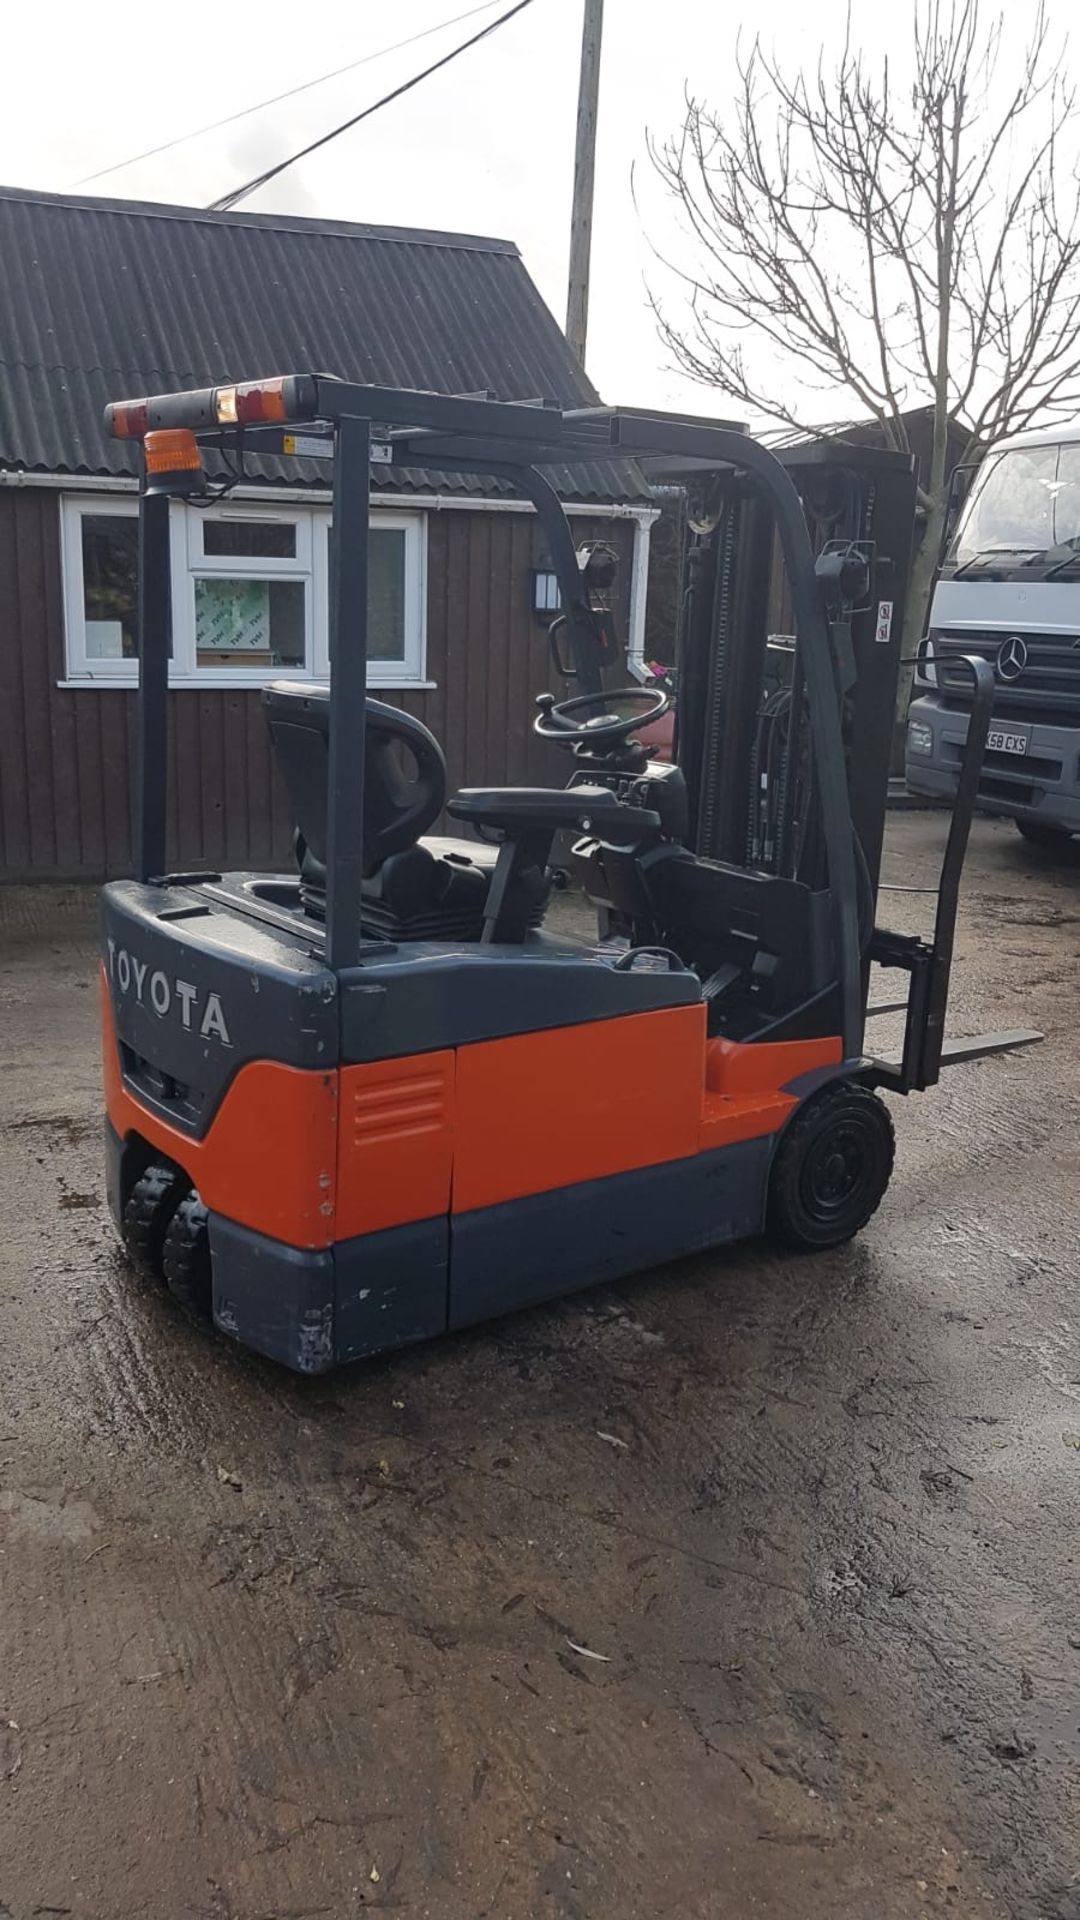 TOYOTA 7FBE15 3 WHEEL BATTERY POWERED FORKLIFT TRUCK, CONTAINER SPEC TRIPLE MAST WITH SIDE SHIFT, - Image 2 of 5